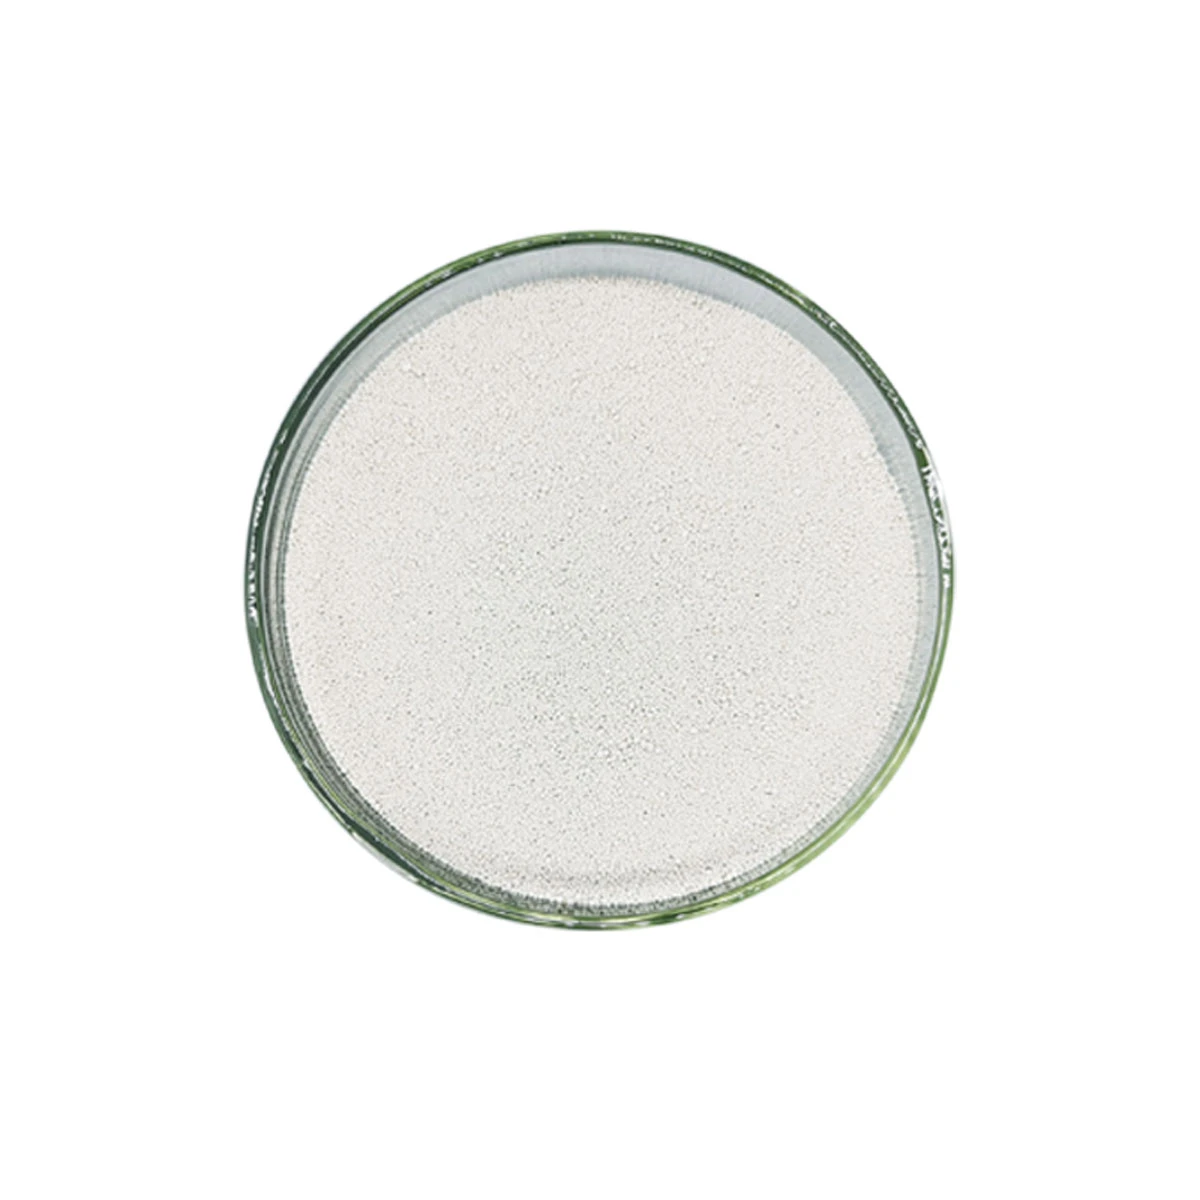 High quality enzymes lipase for detergent granule high concentrated